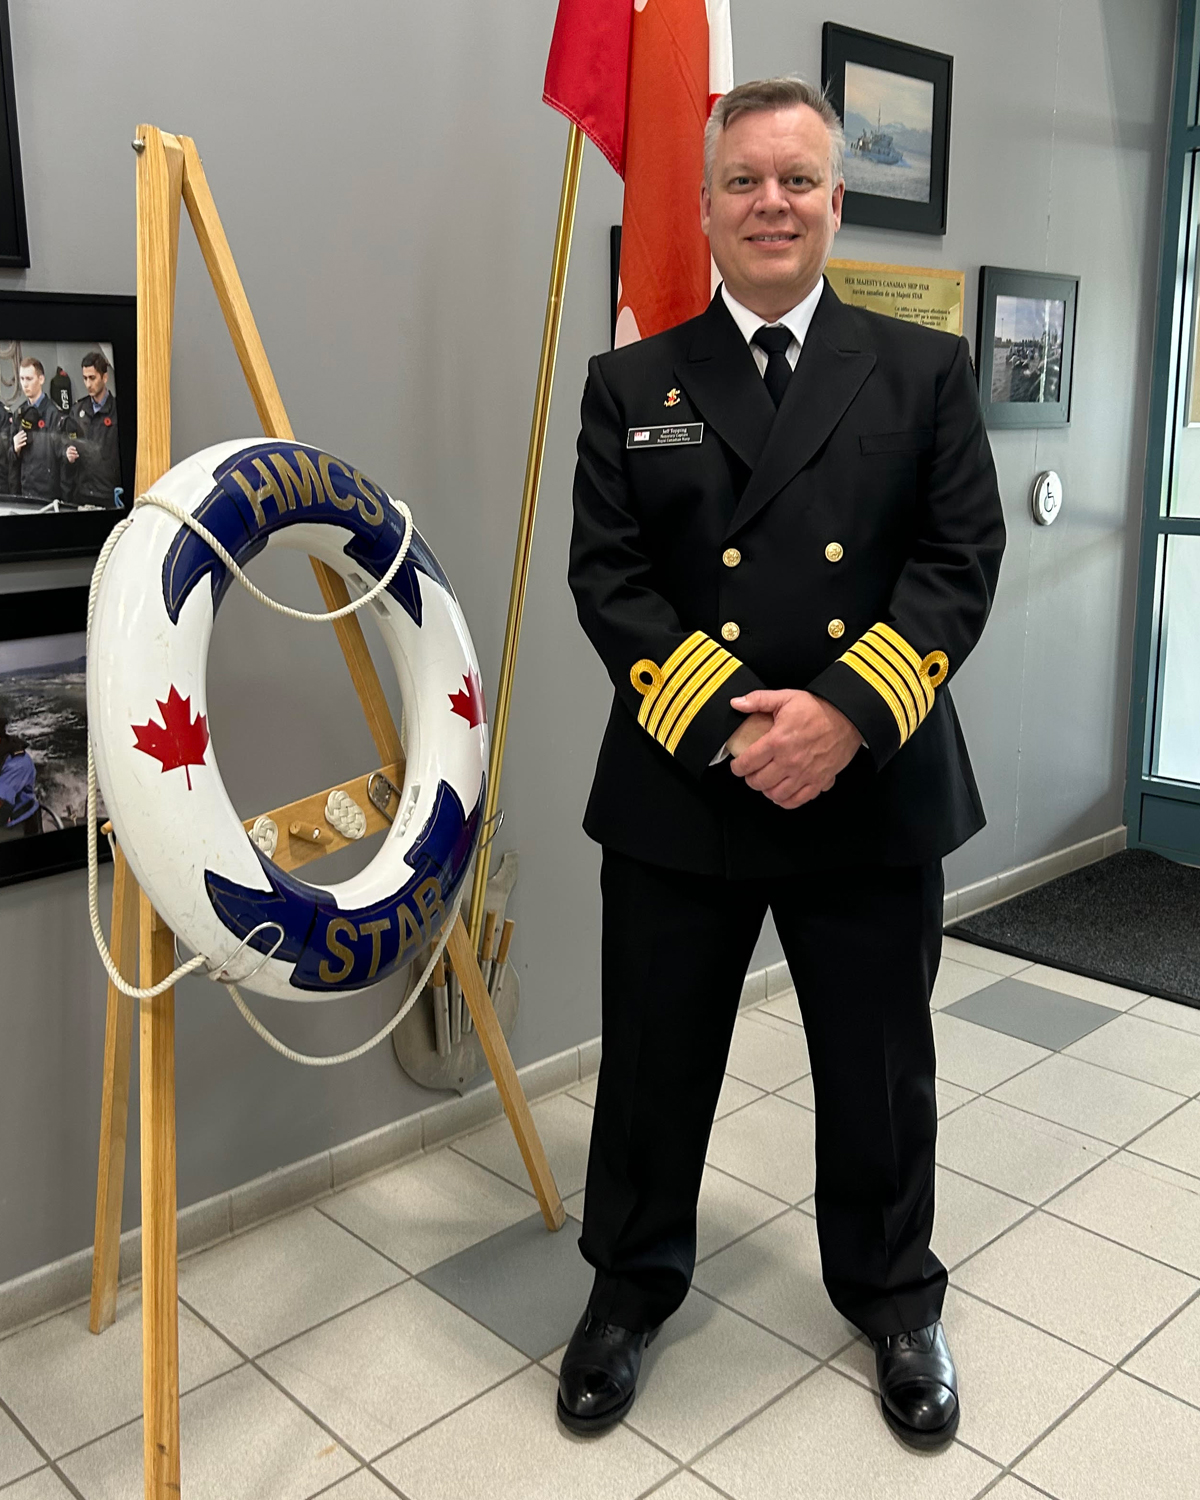 Honorary Captain (Navy) (HCapt(N)) Jeff Topping during a visit to Hamilton, Ont.  HCapt(N) Topping was recently named to the ambassador role for HMCS Prevost, the Naval Reserve Unit of London, Ont.  Photo: HMCS Star.